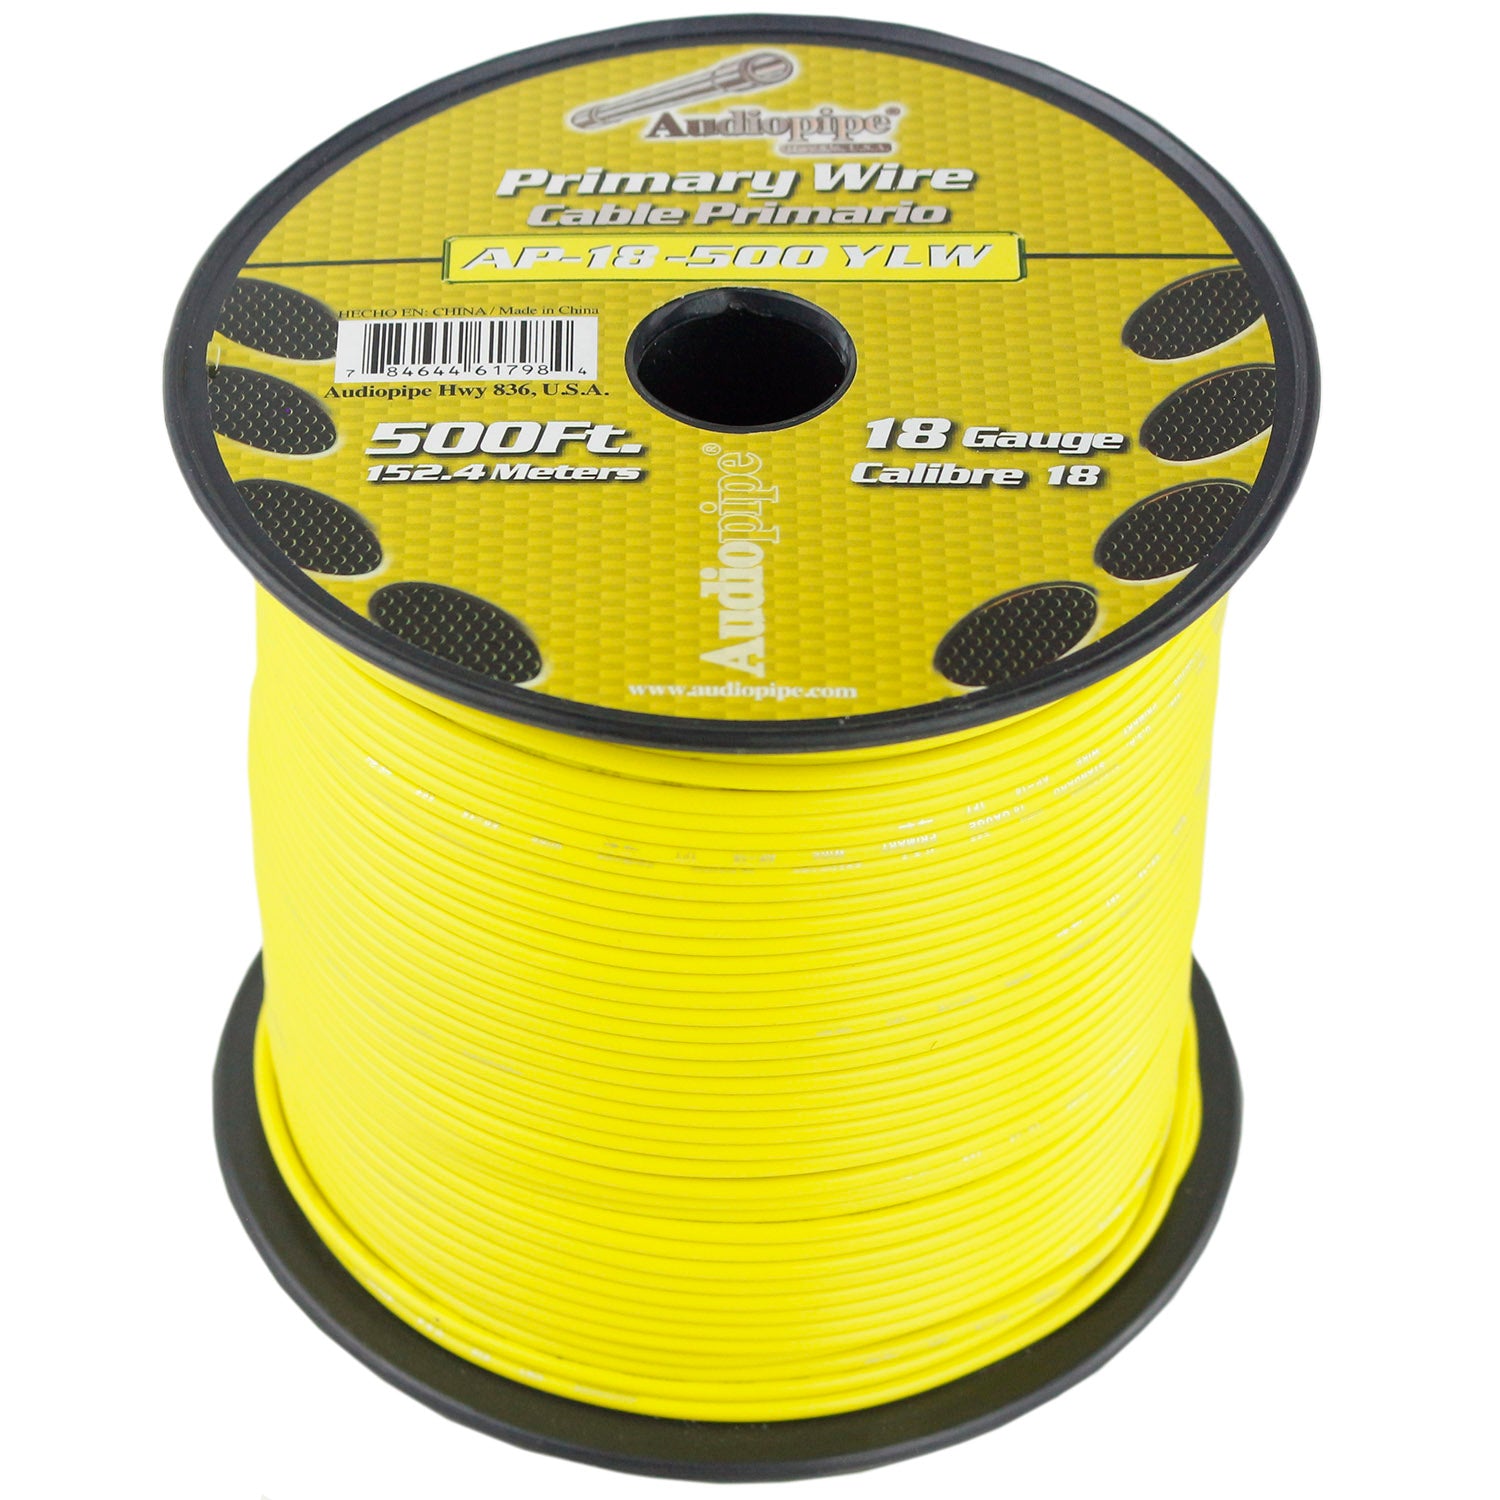 500' FT Spool Of Yellow 18 Gauge AWG Feet Home Primary Power Cable Remote Wire